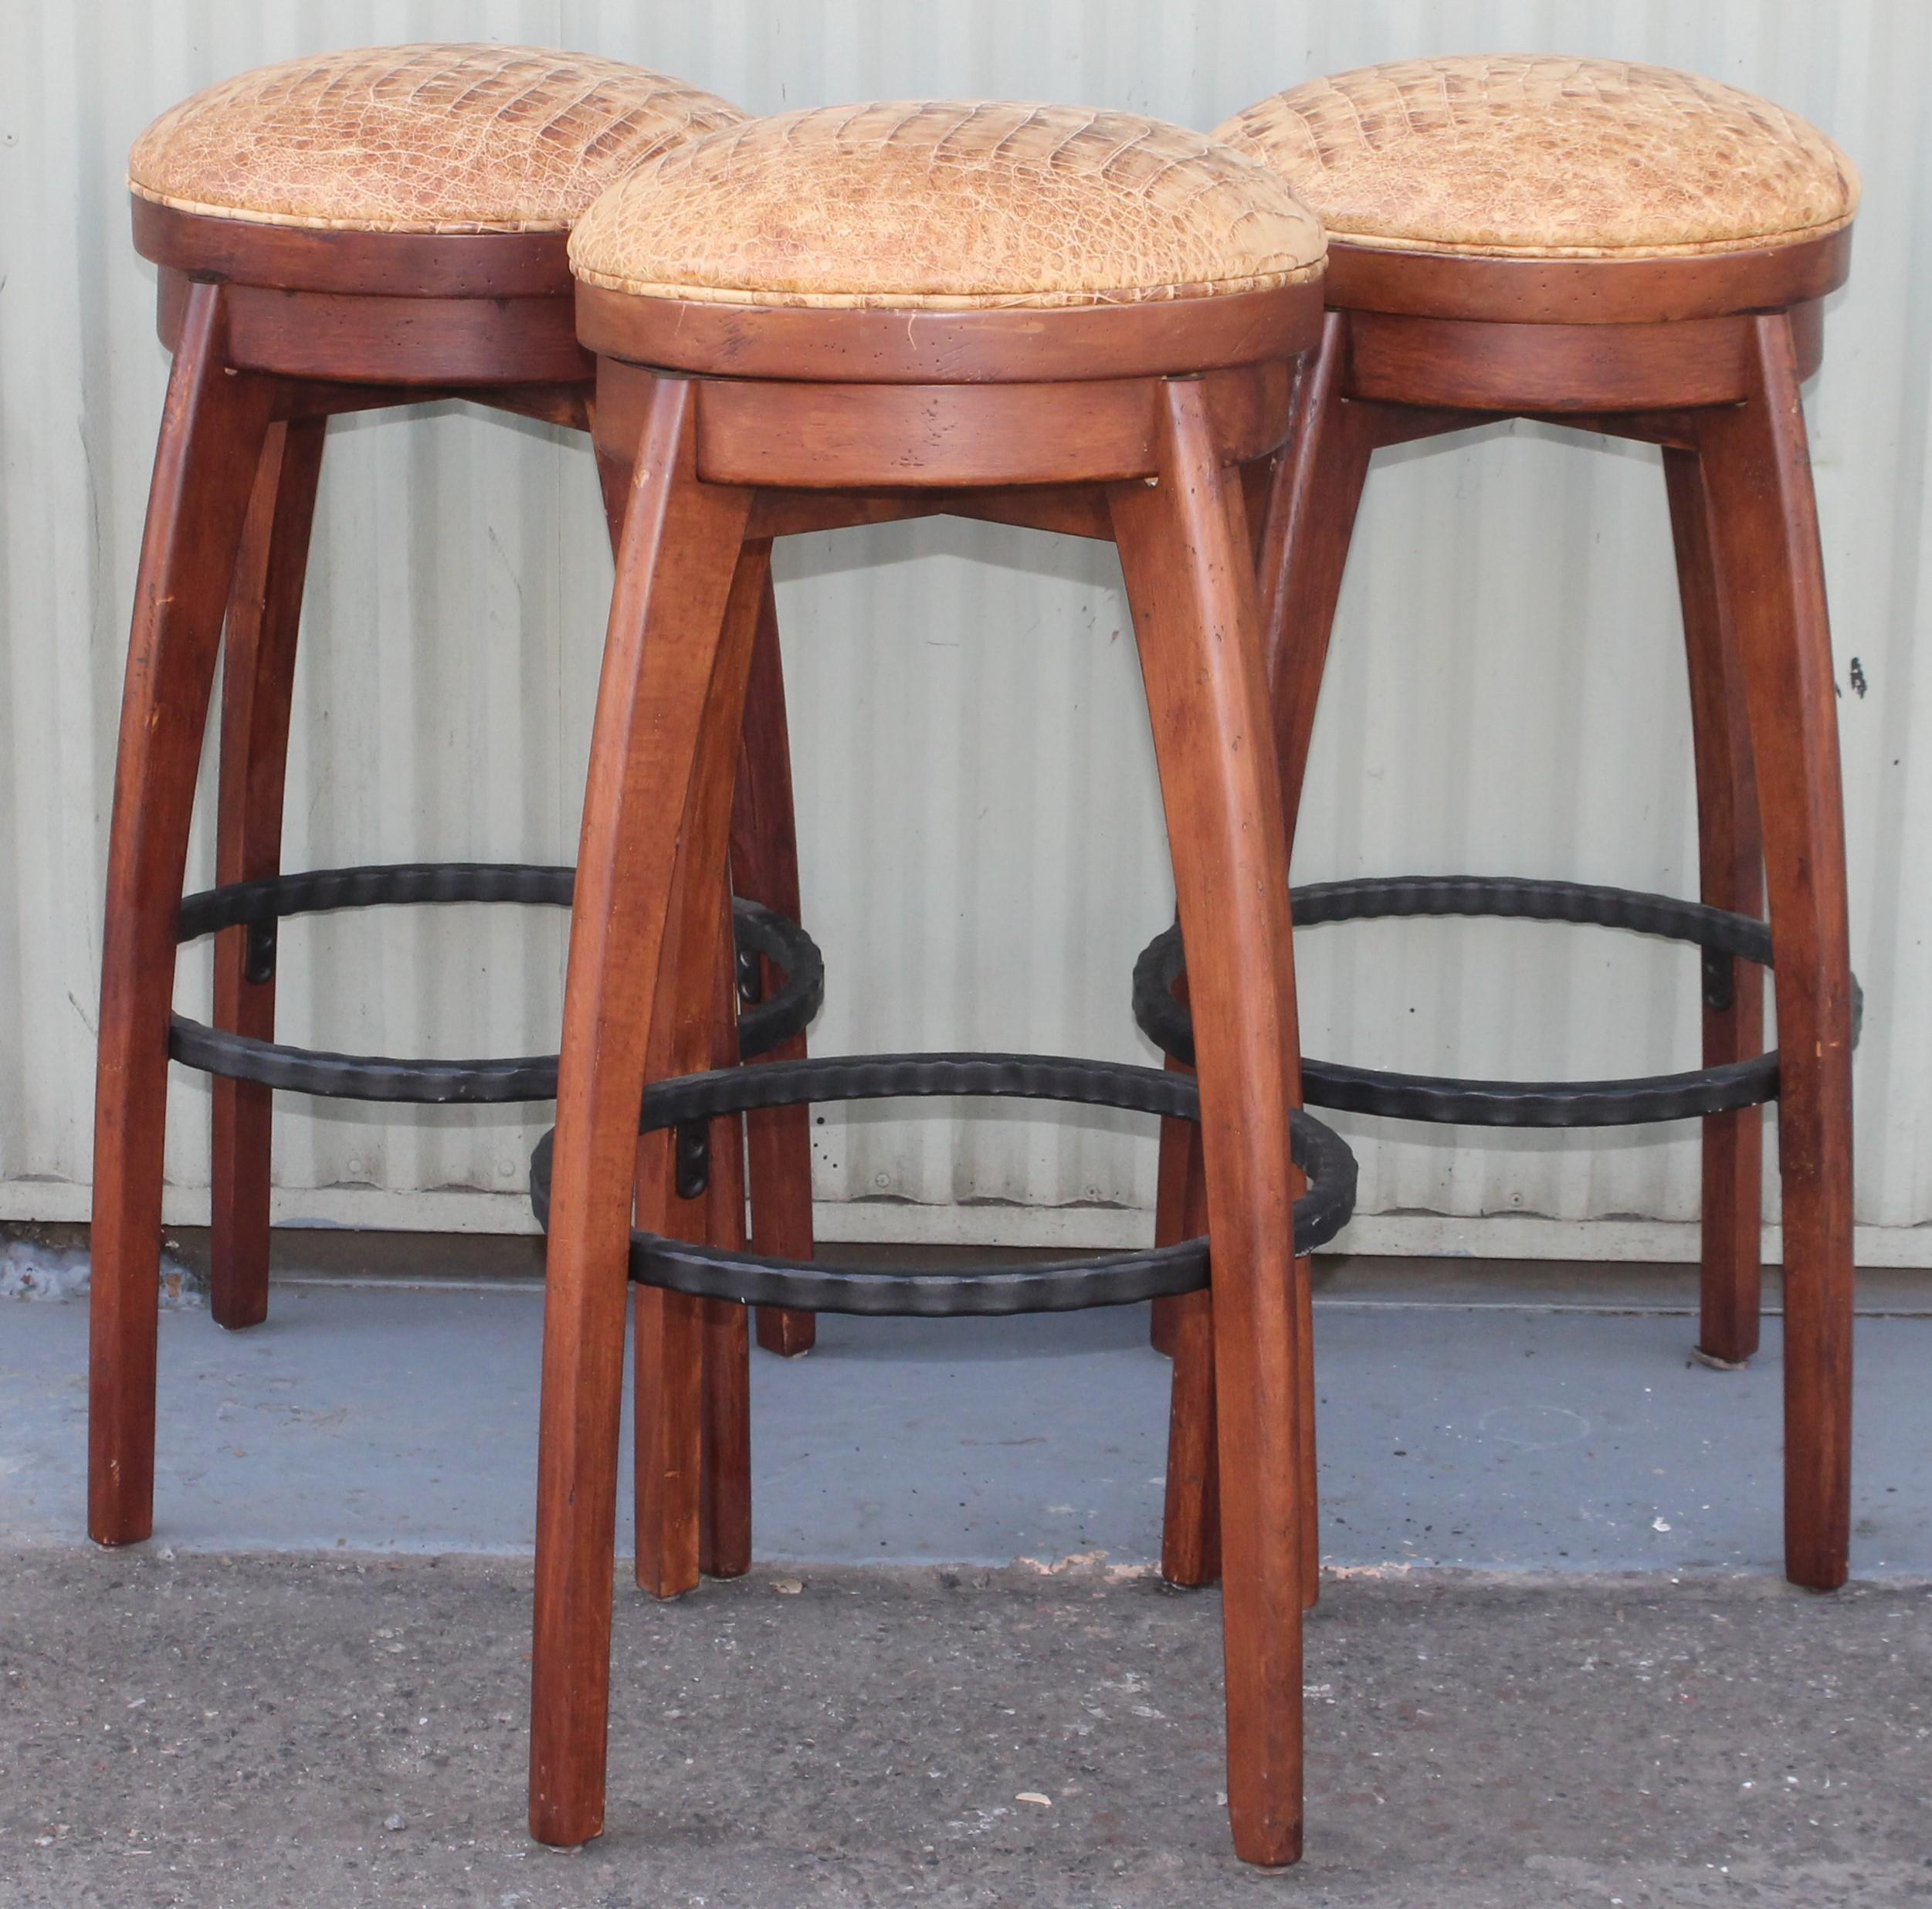 These amazing Mid-Century Modern walnut bar stools are in Fine condition and have a newly distressed leather seats and swivel as well. Sold as a set of three. We also have two others in inventory. Can purchase three or five stools.